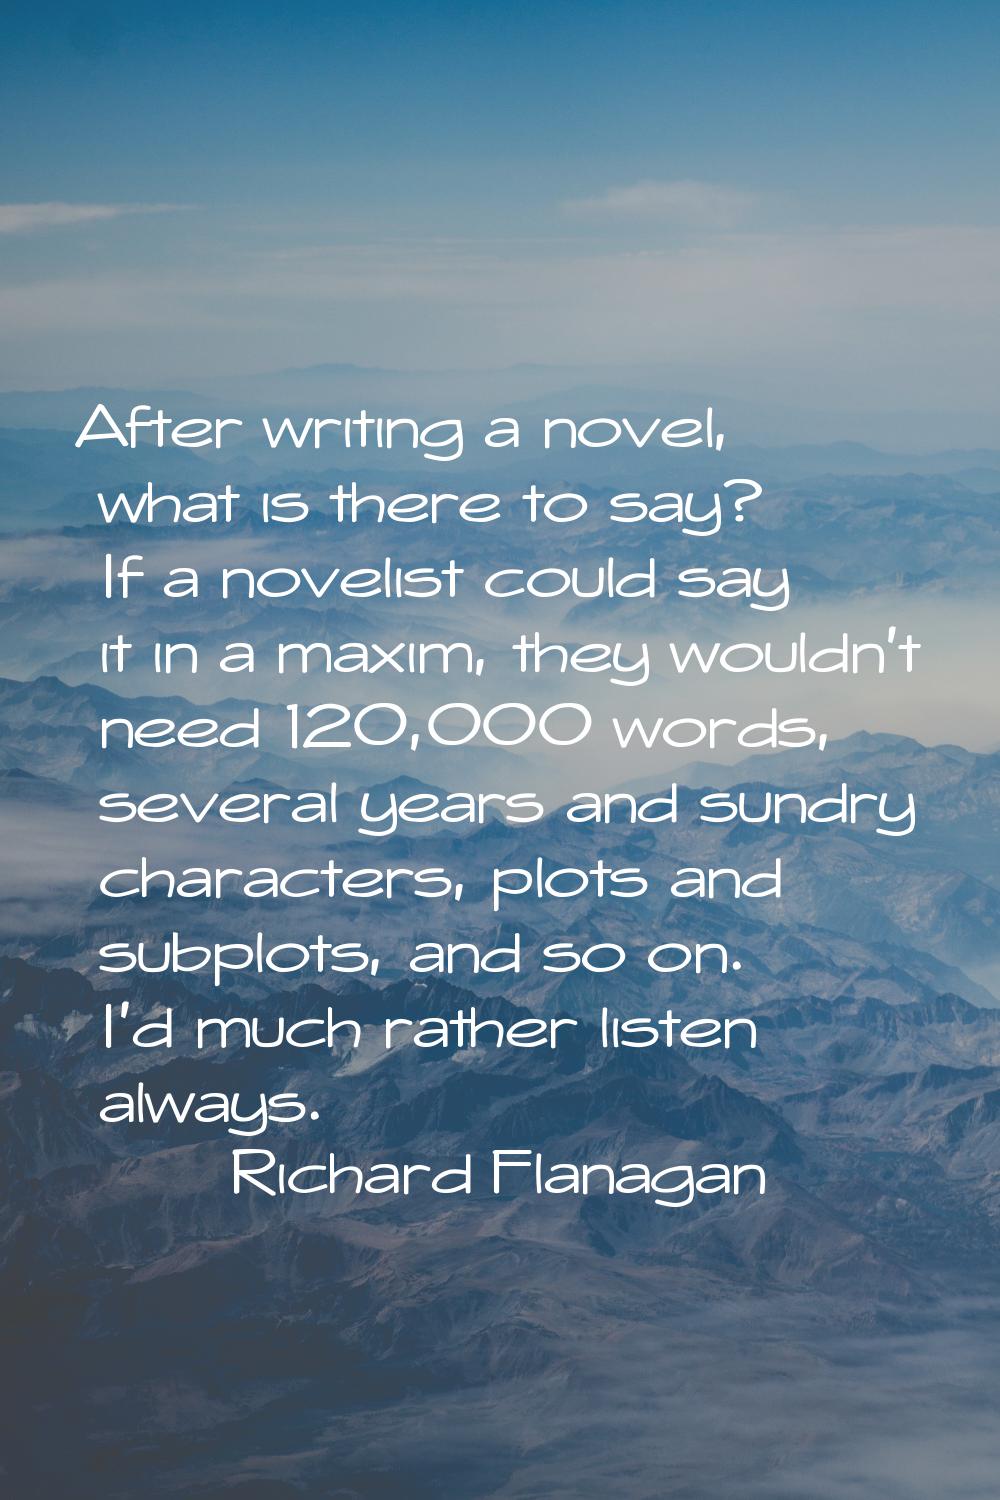 After writing a novel, what is there to say? If a novelist could say it in a maxim, they wouldn't n